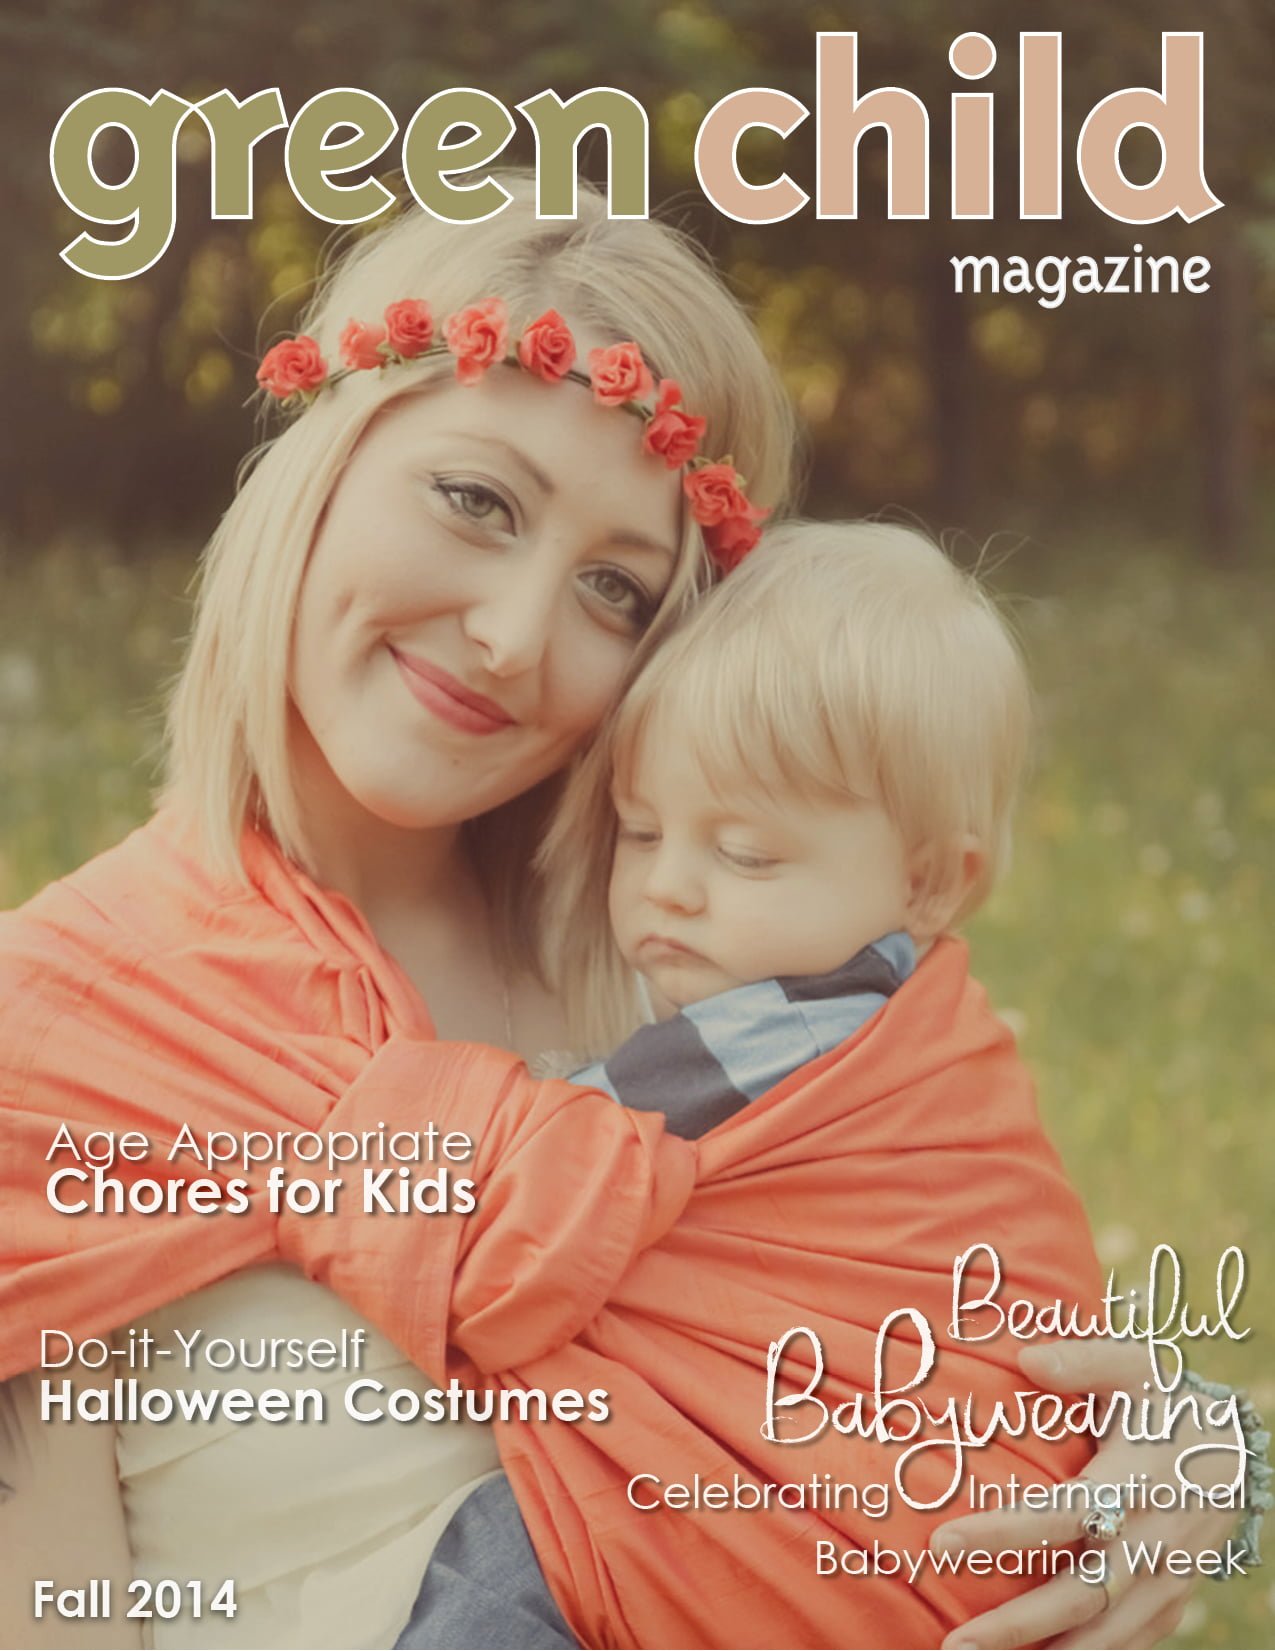 Fall 2014 issue of Green Child Magazine